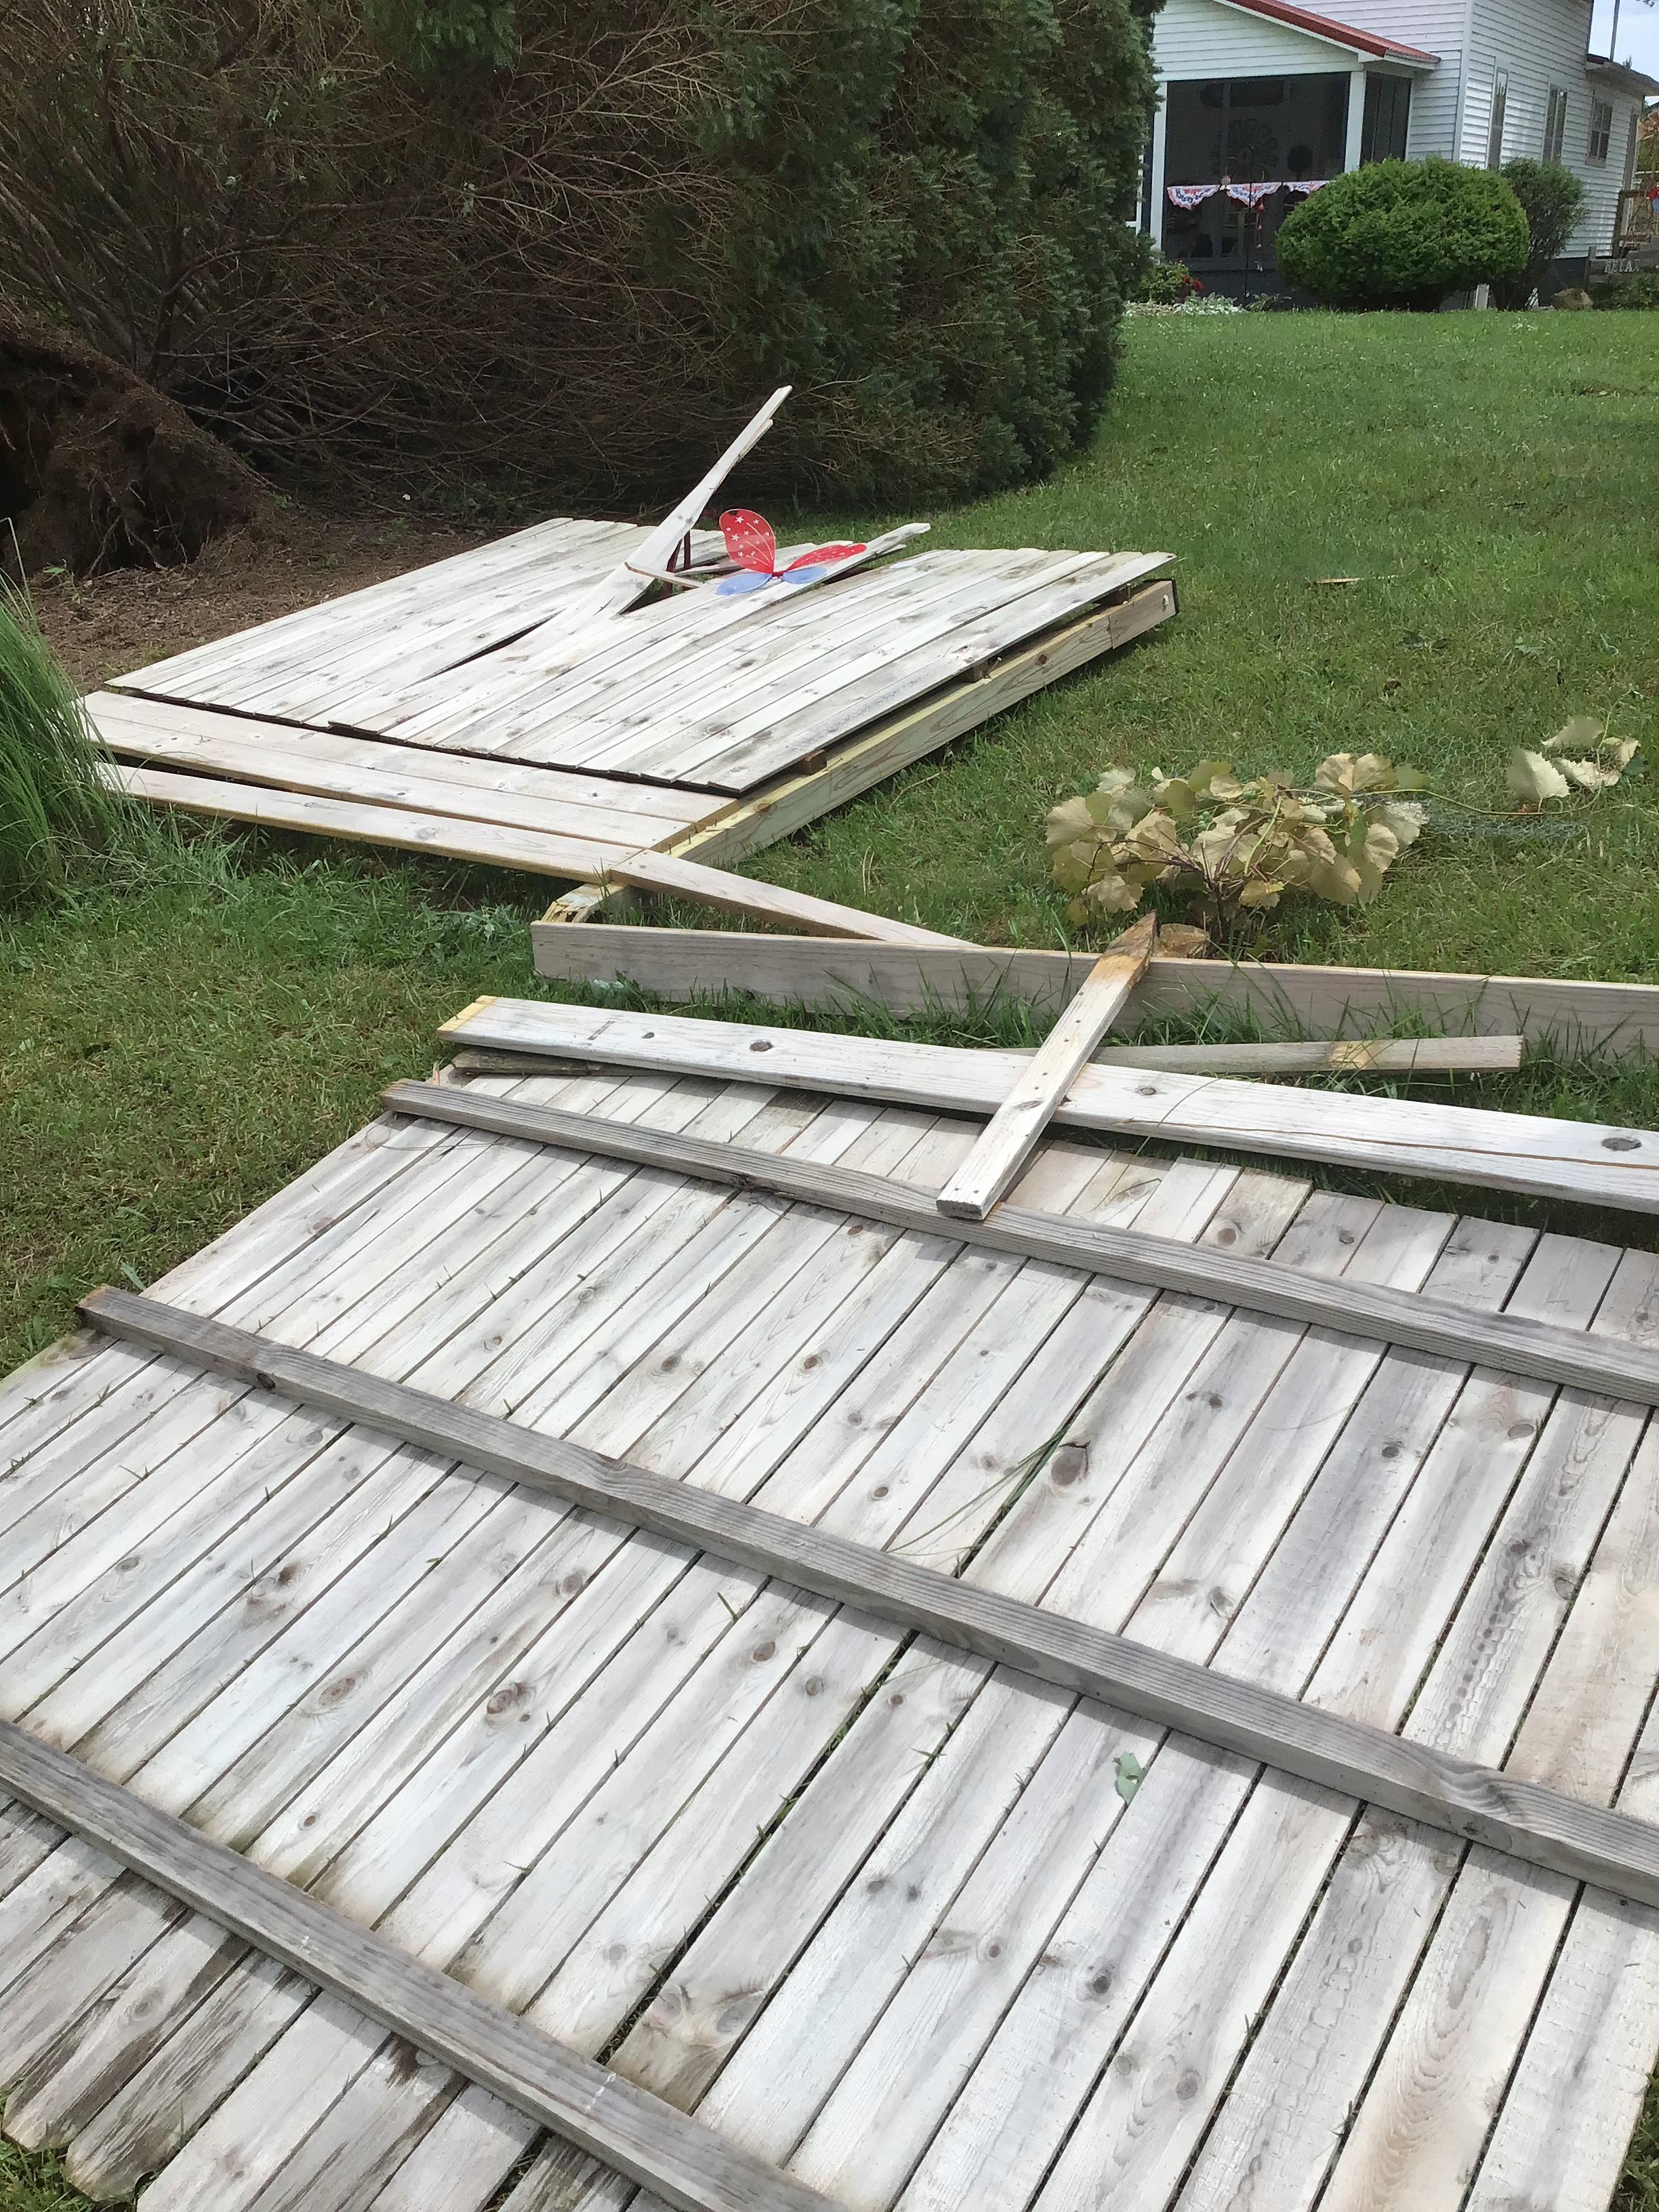 Photo of fence damaged in Rensselaer, MO.